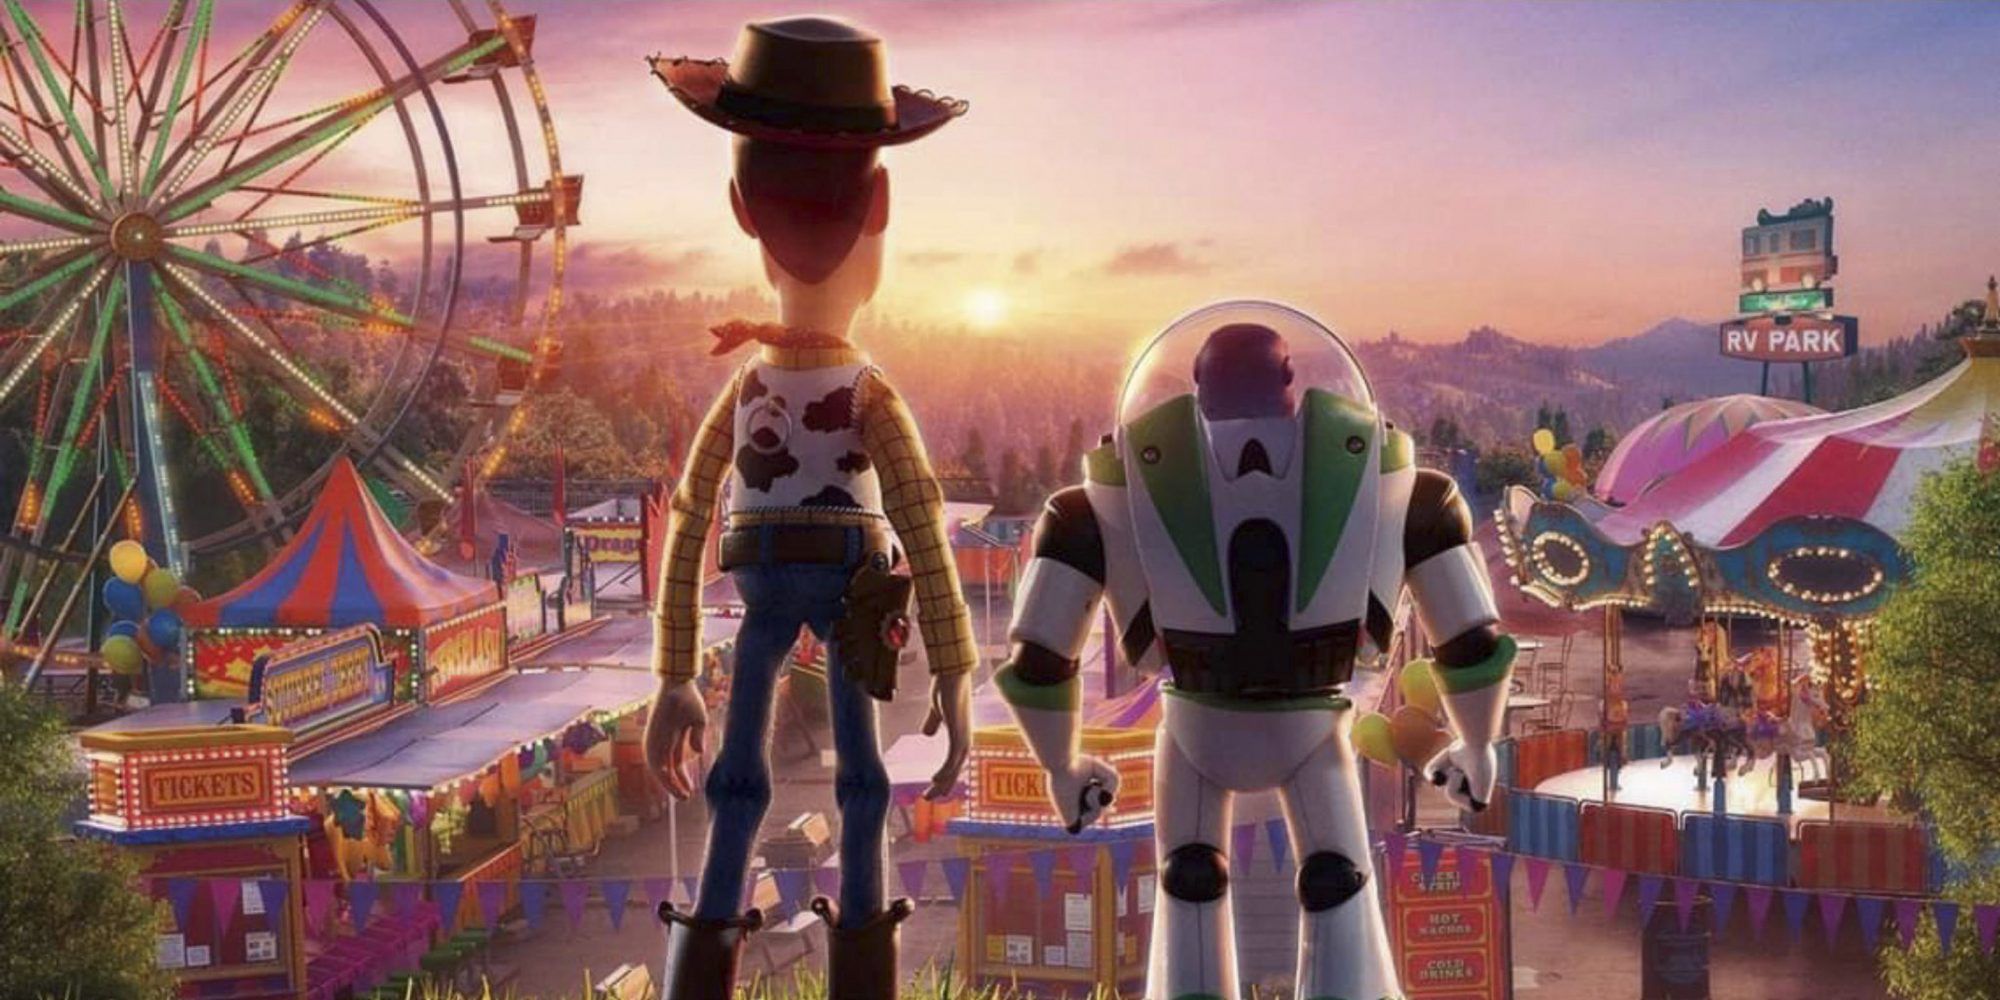 Toy Story 5 Announcement Leaves Disney Fans Questioning Its Necessity